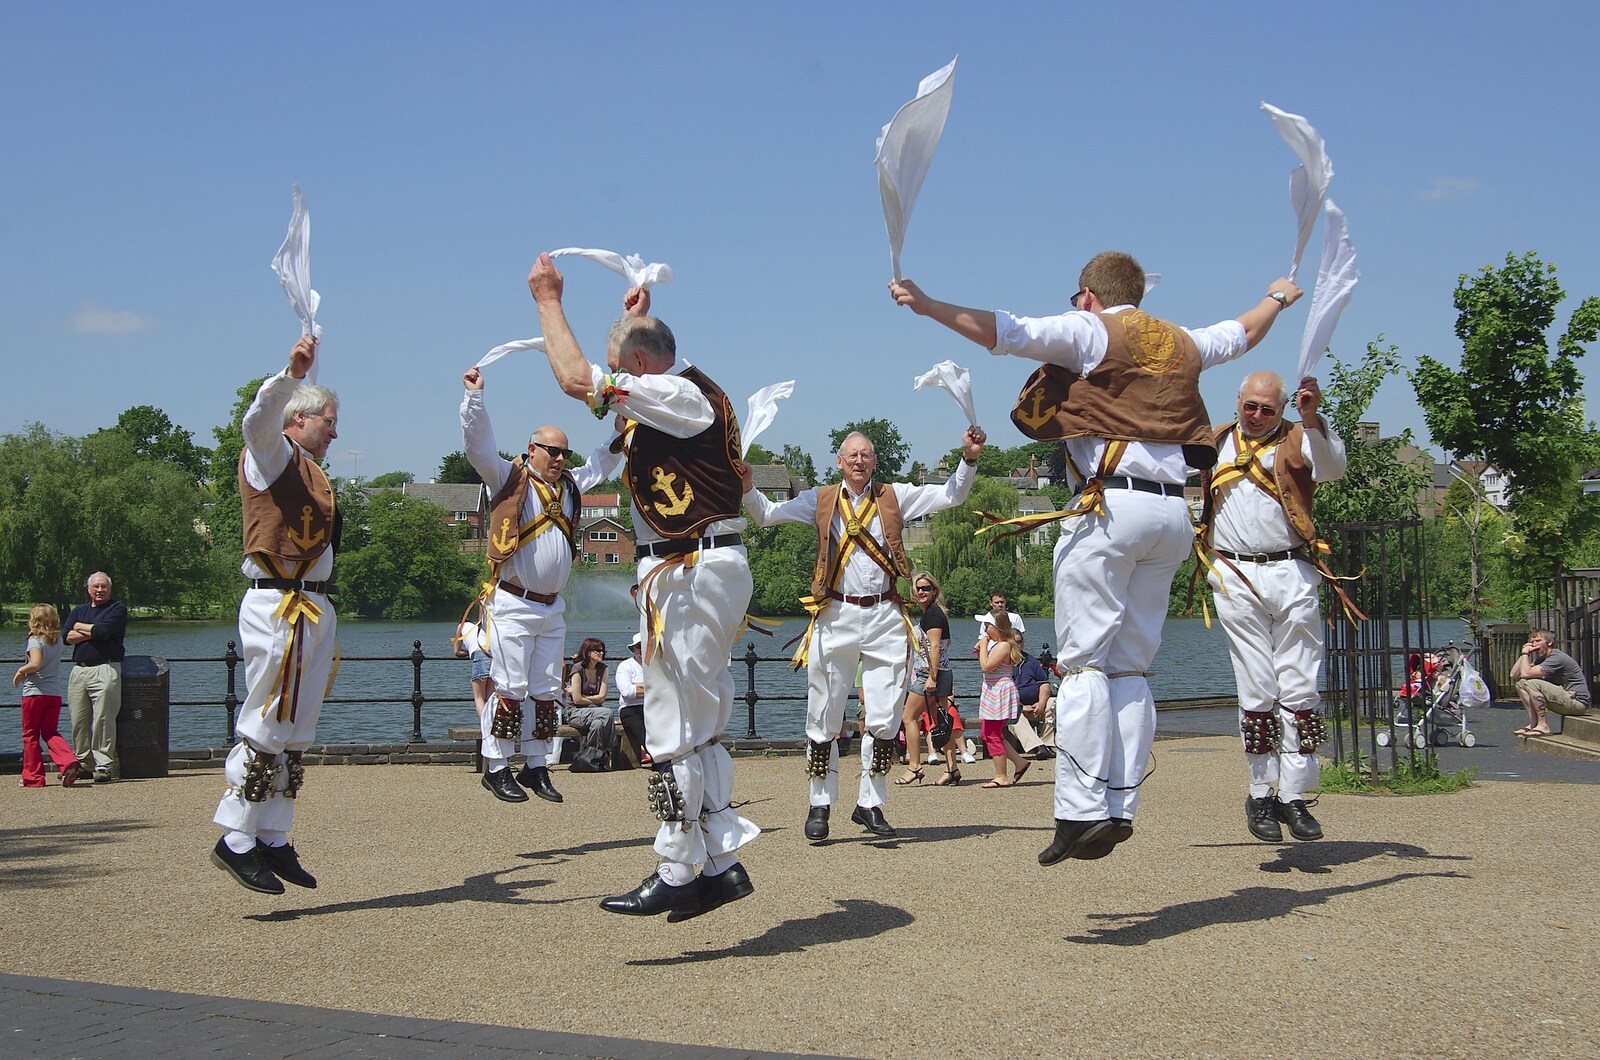 Morris Dancing, and Rick Wakeman Opens the Park Pavillion Mural, Diss, Norfolk - 30th May 2008: All the Greenwich Morris-dudes are in the air